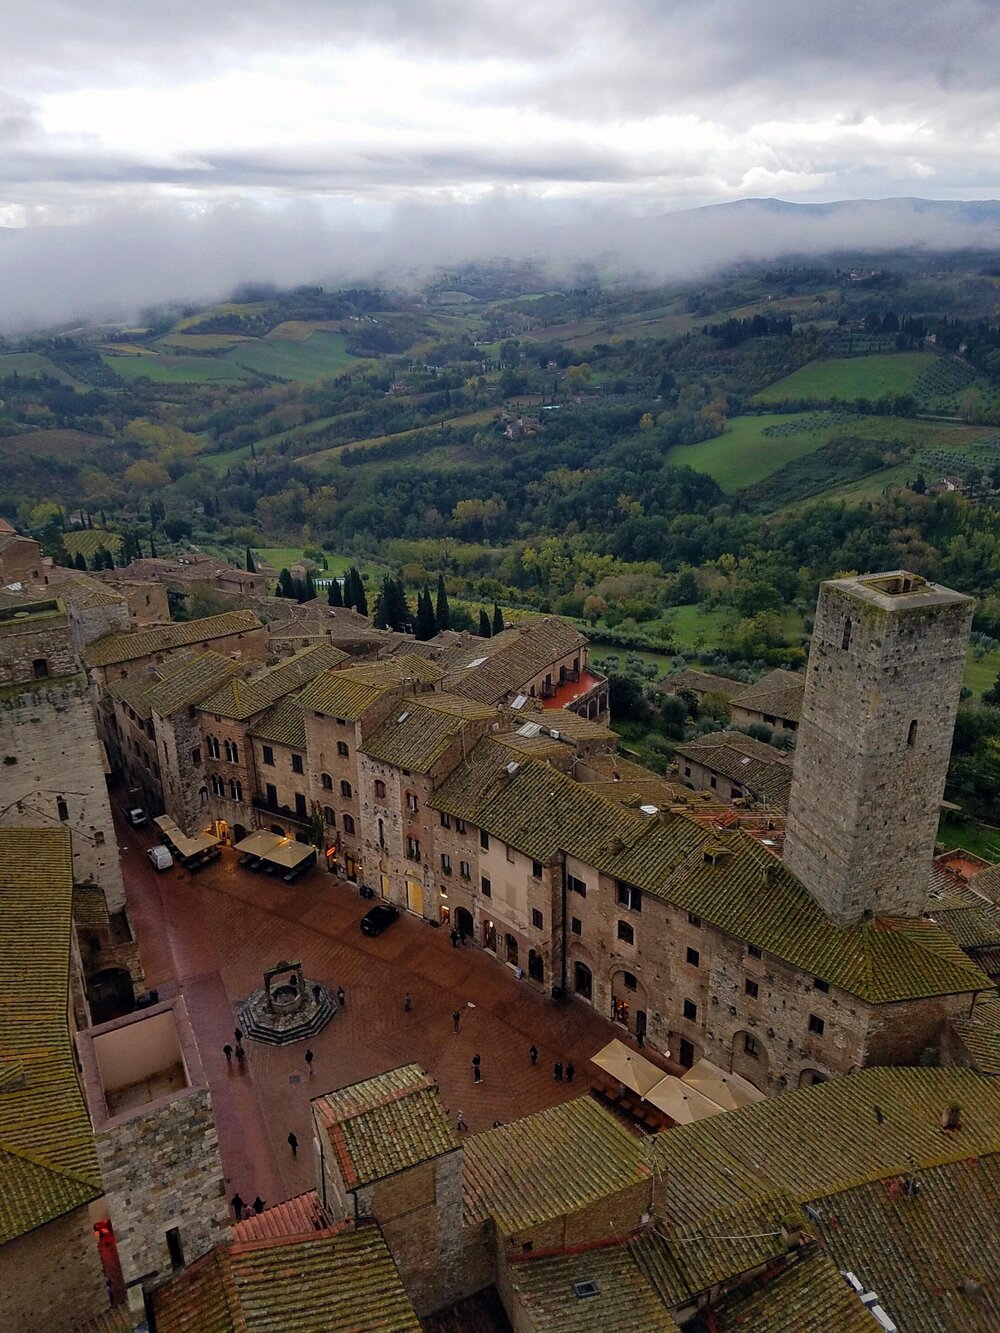 View of Piazza della Cisterna from the tower